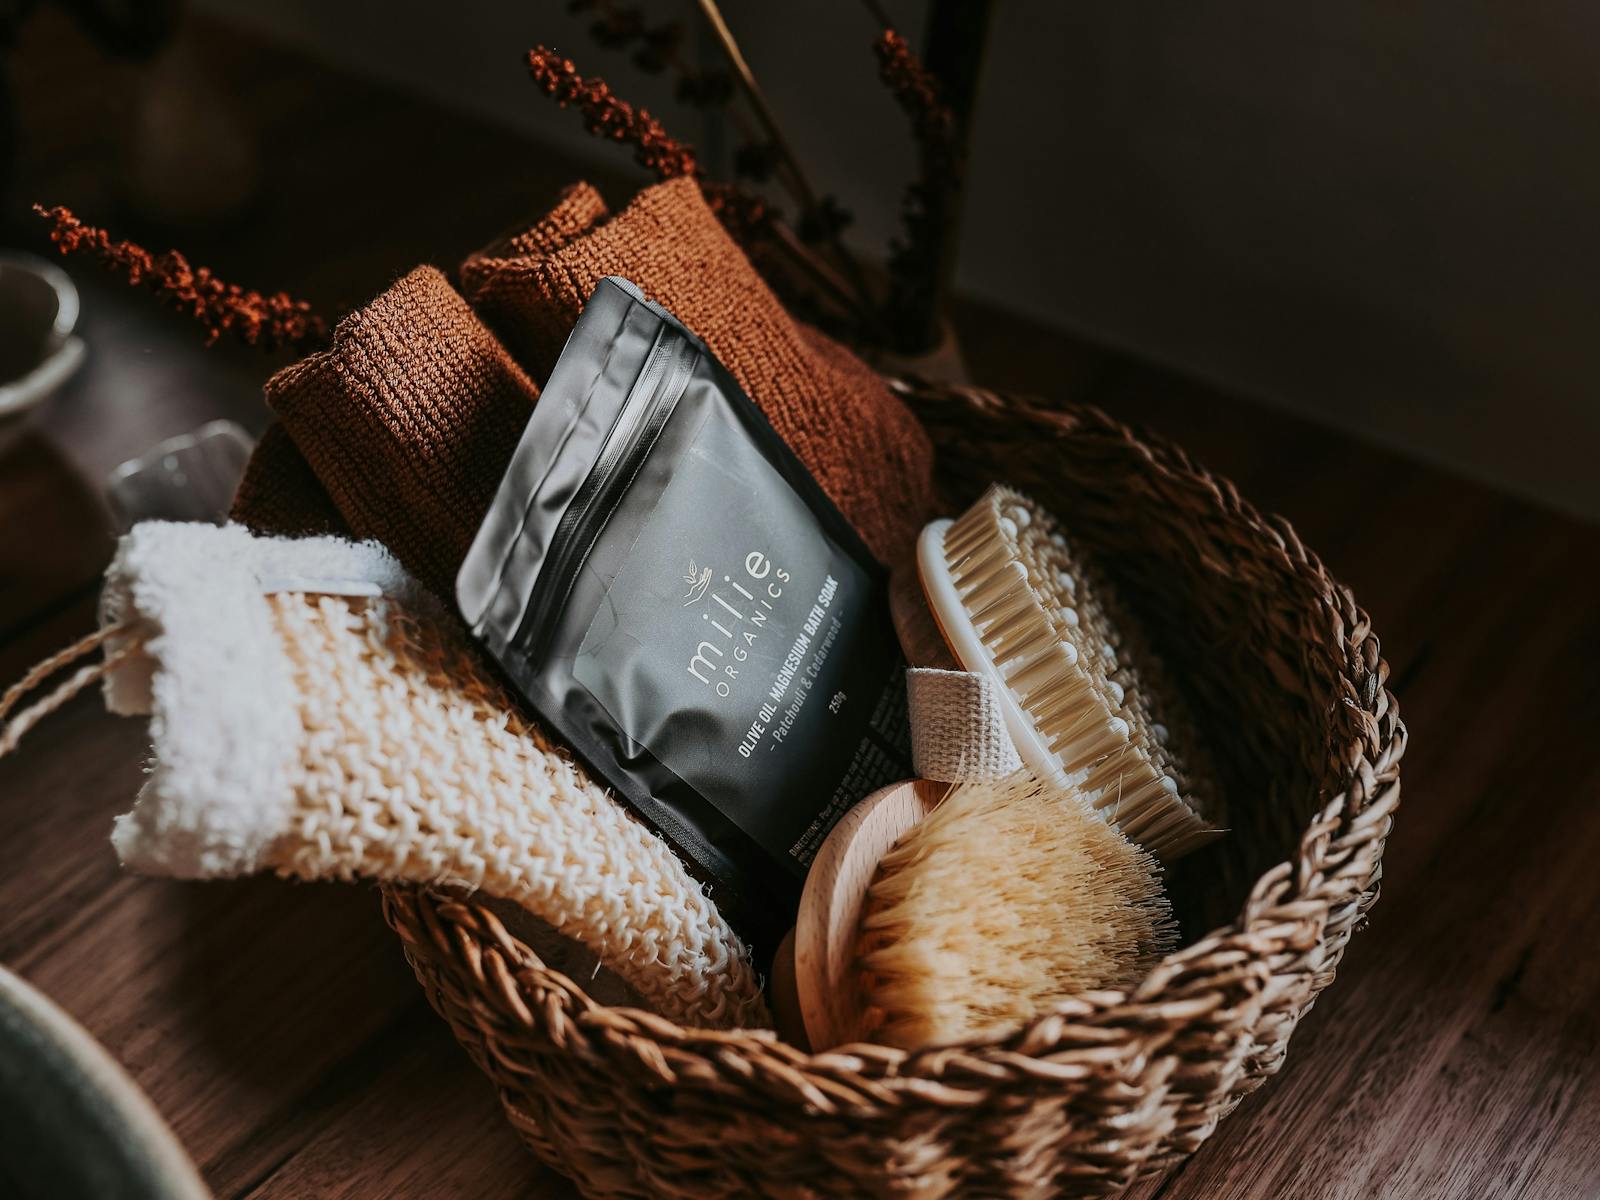 Tasmanian products to indulge your senses for ultimate relaxation